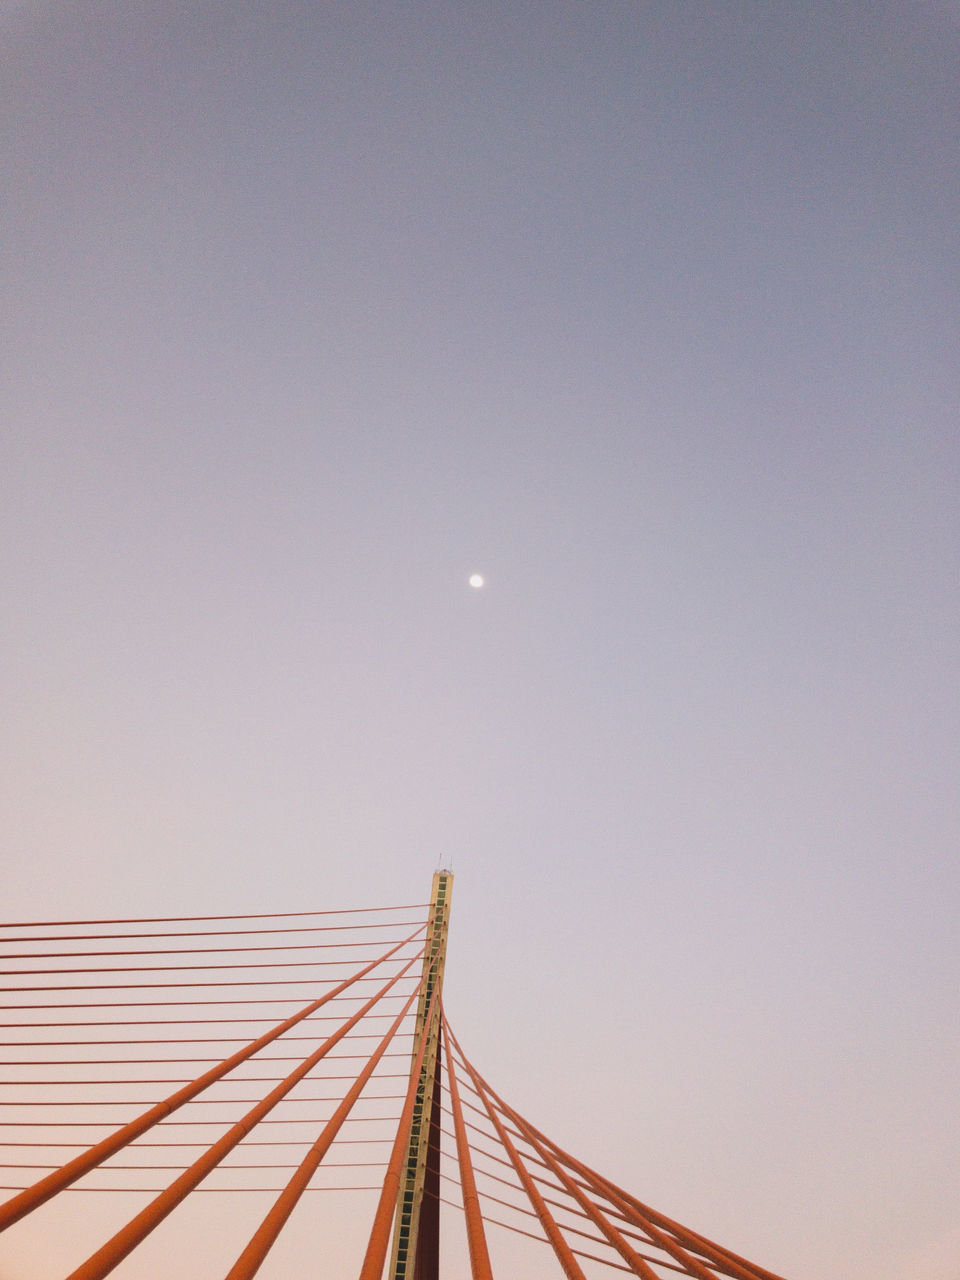 HIGH SECTION OF BRIDGE AGAINST CLEAR SKY